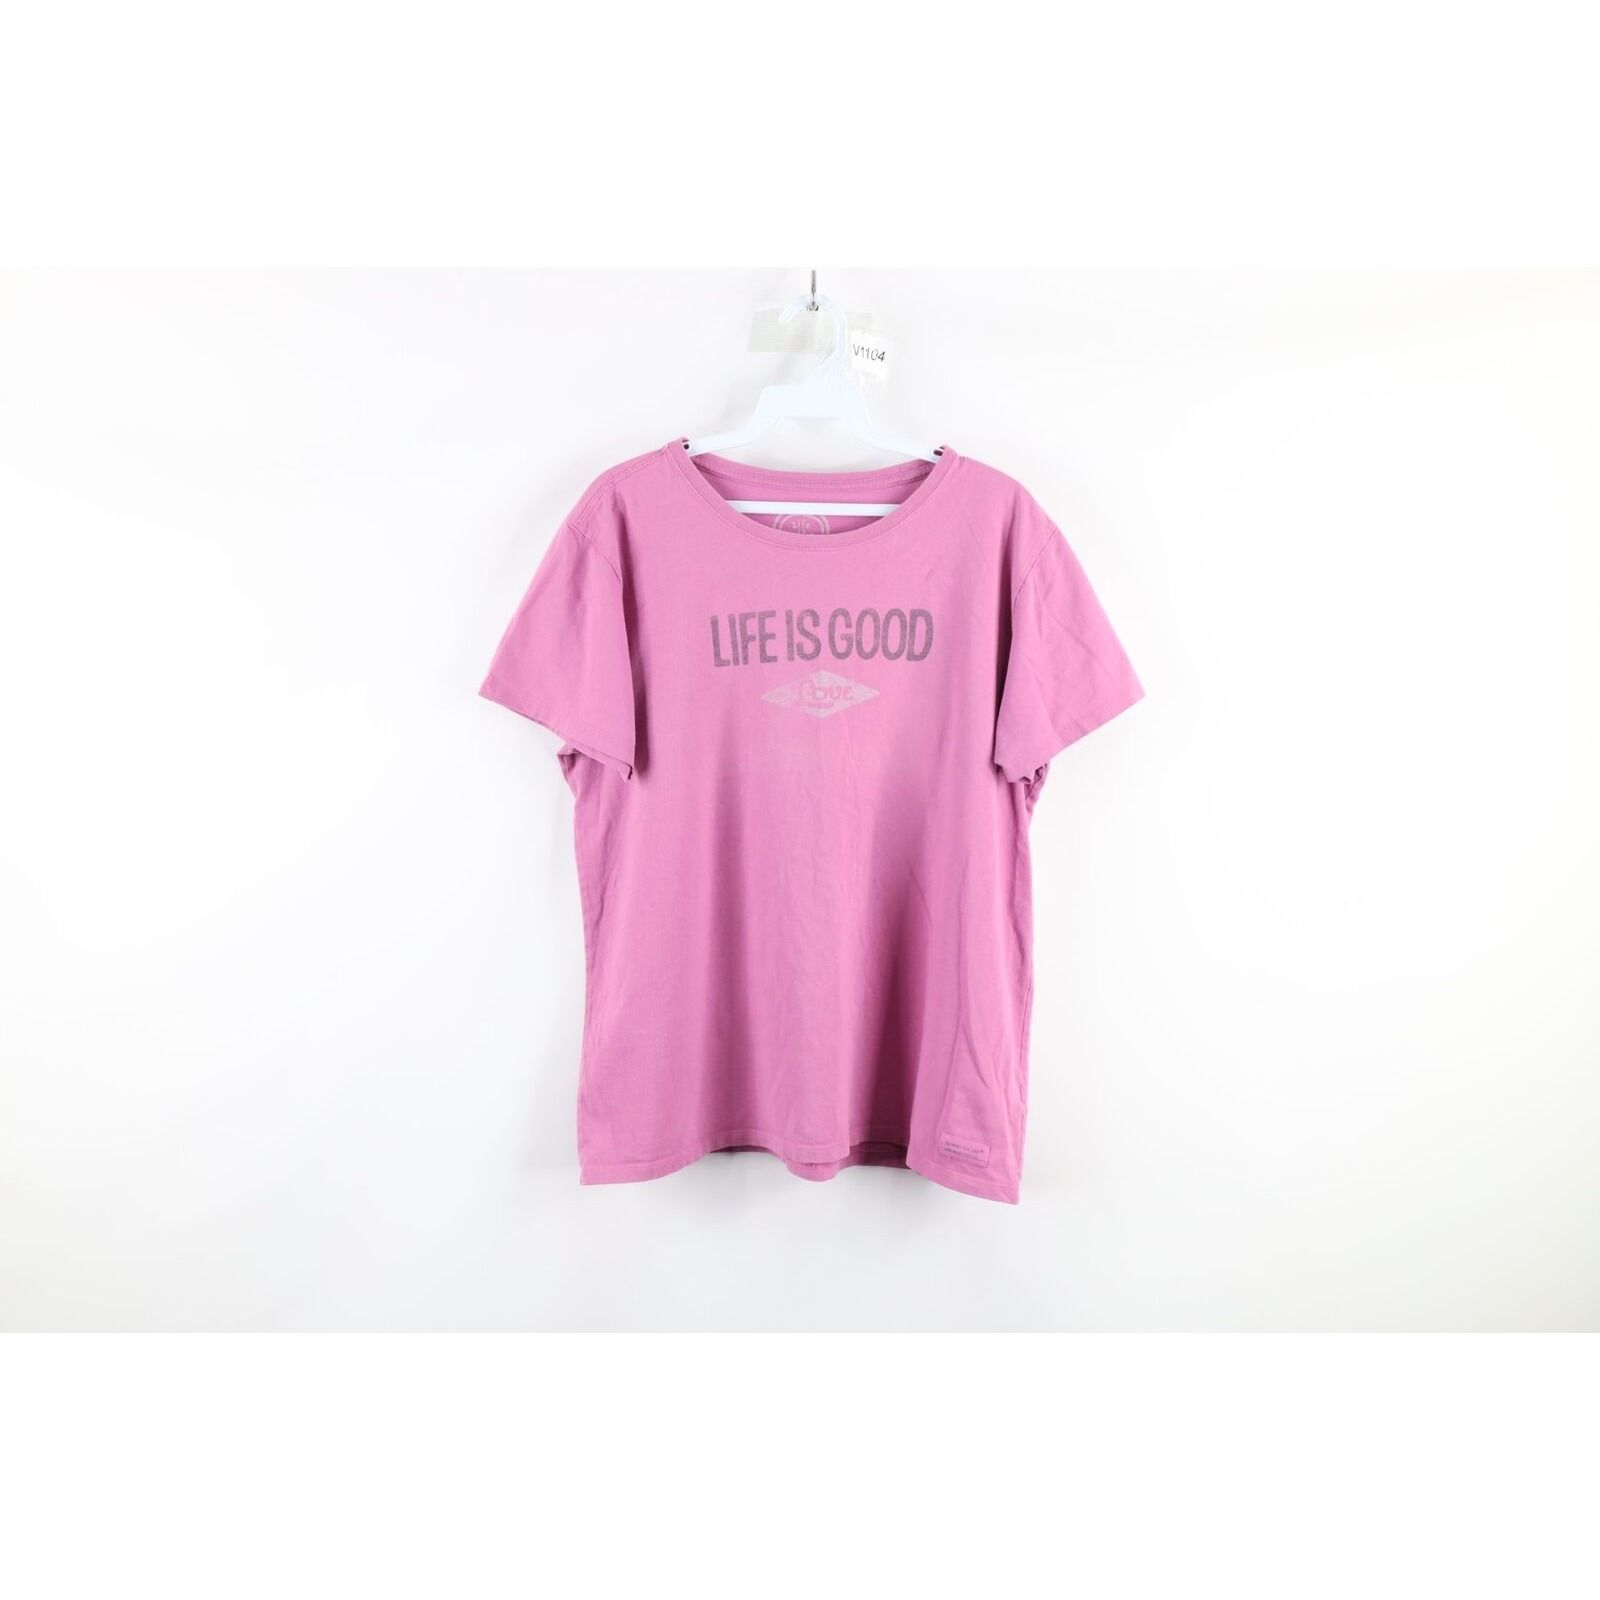 Vintage Vintage Life is Good Distressed Love Short Sleeve T-Shirt Size L / US 10 / IT 46 - 1 Preview